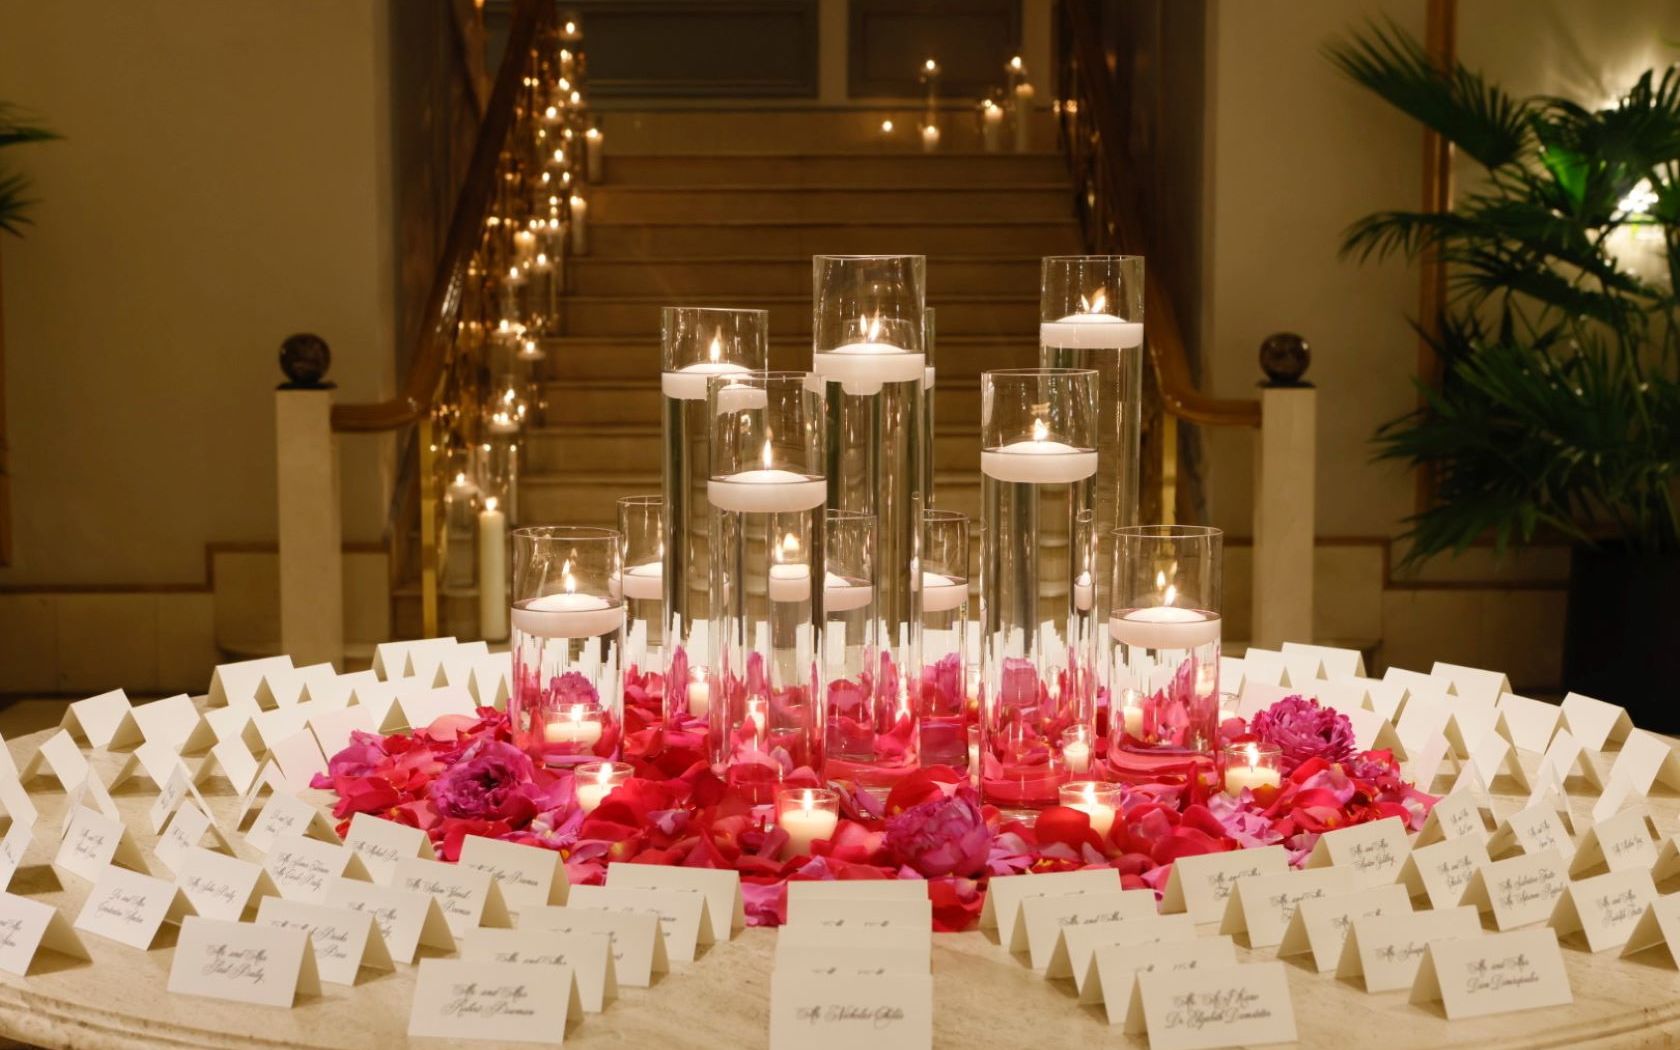 A Table With Candles And Flowers